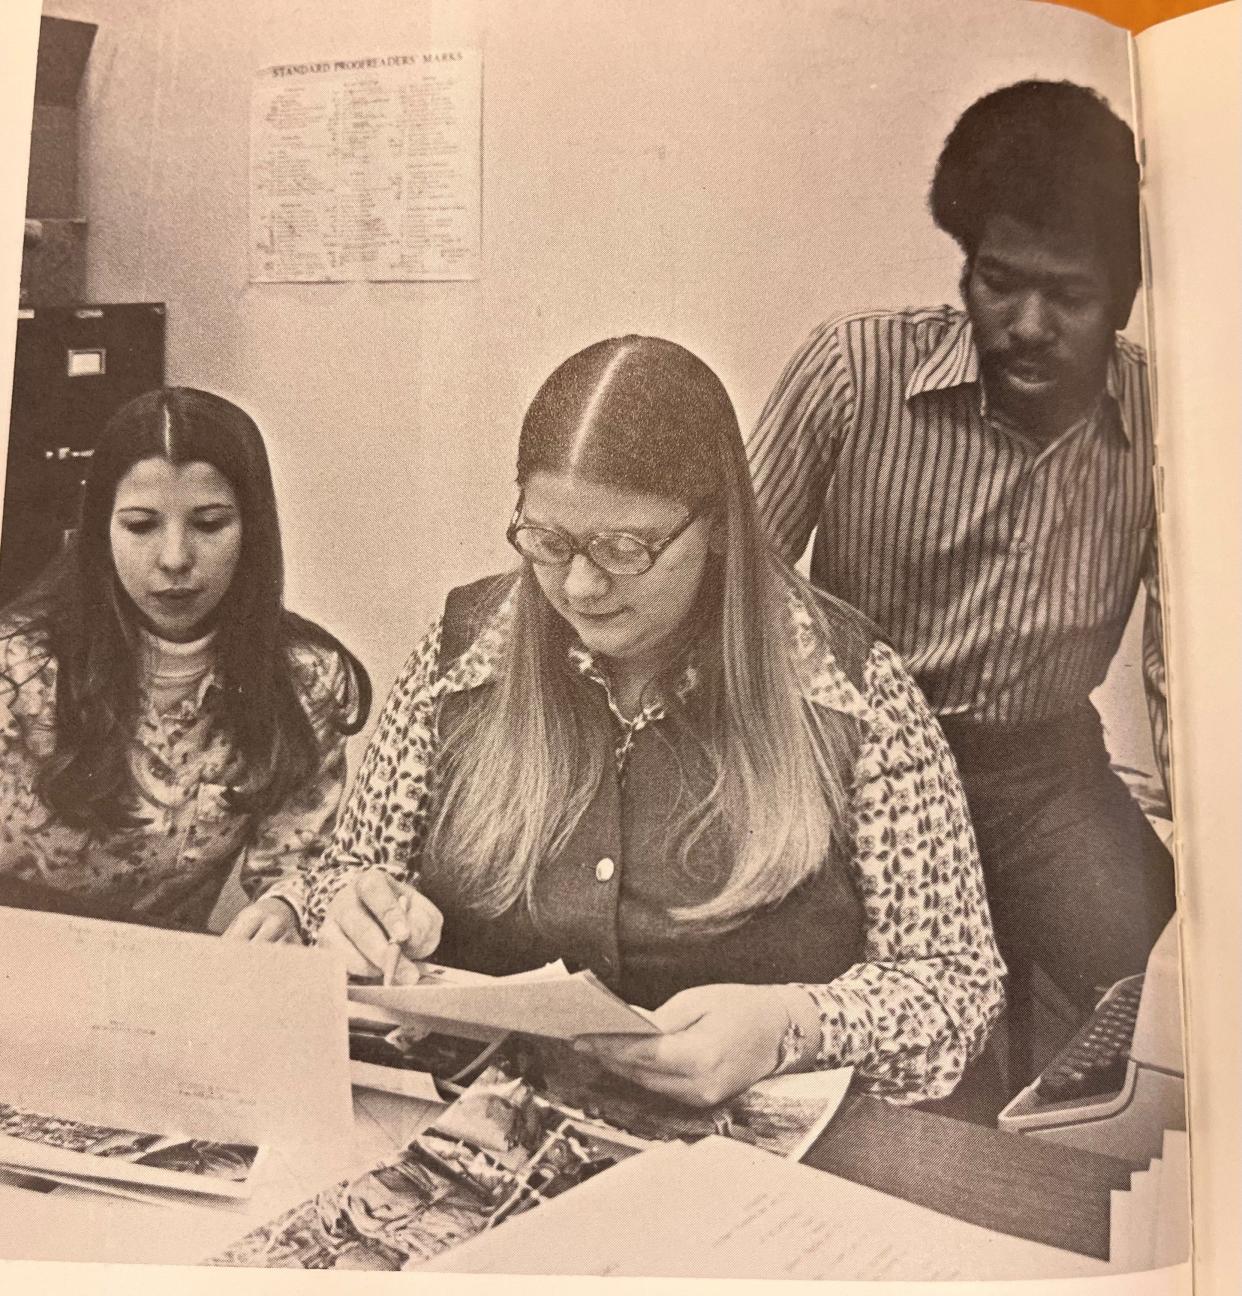 One of the growing campus organizations at the University of Tennessee with diversity in leadership by 1974 was the Volunteer yearbook staff, shown in that year’s yearbook. From left are Volunteer editor Jeanne Barnes, managing editor Pam Hall, and features editor Reginald Roberts.